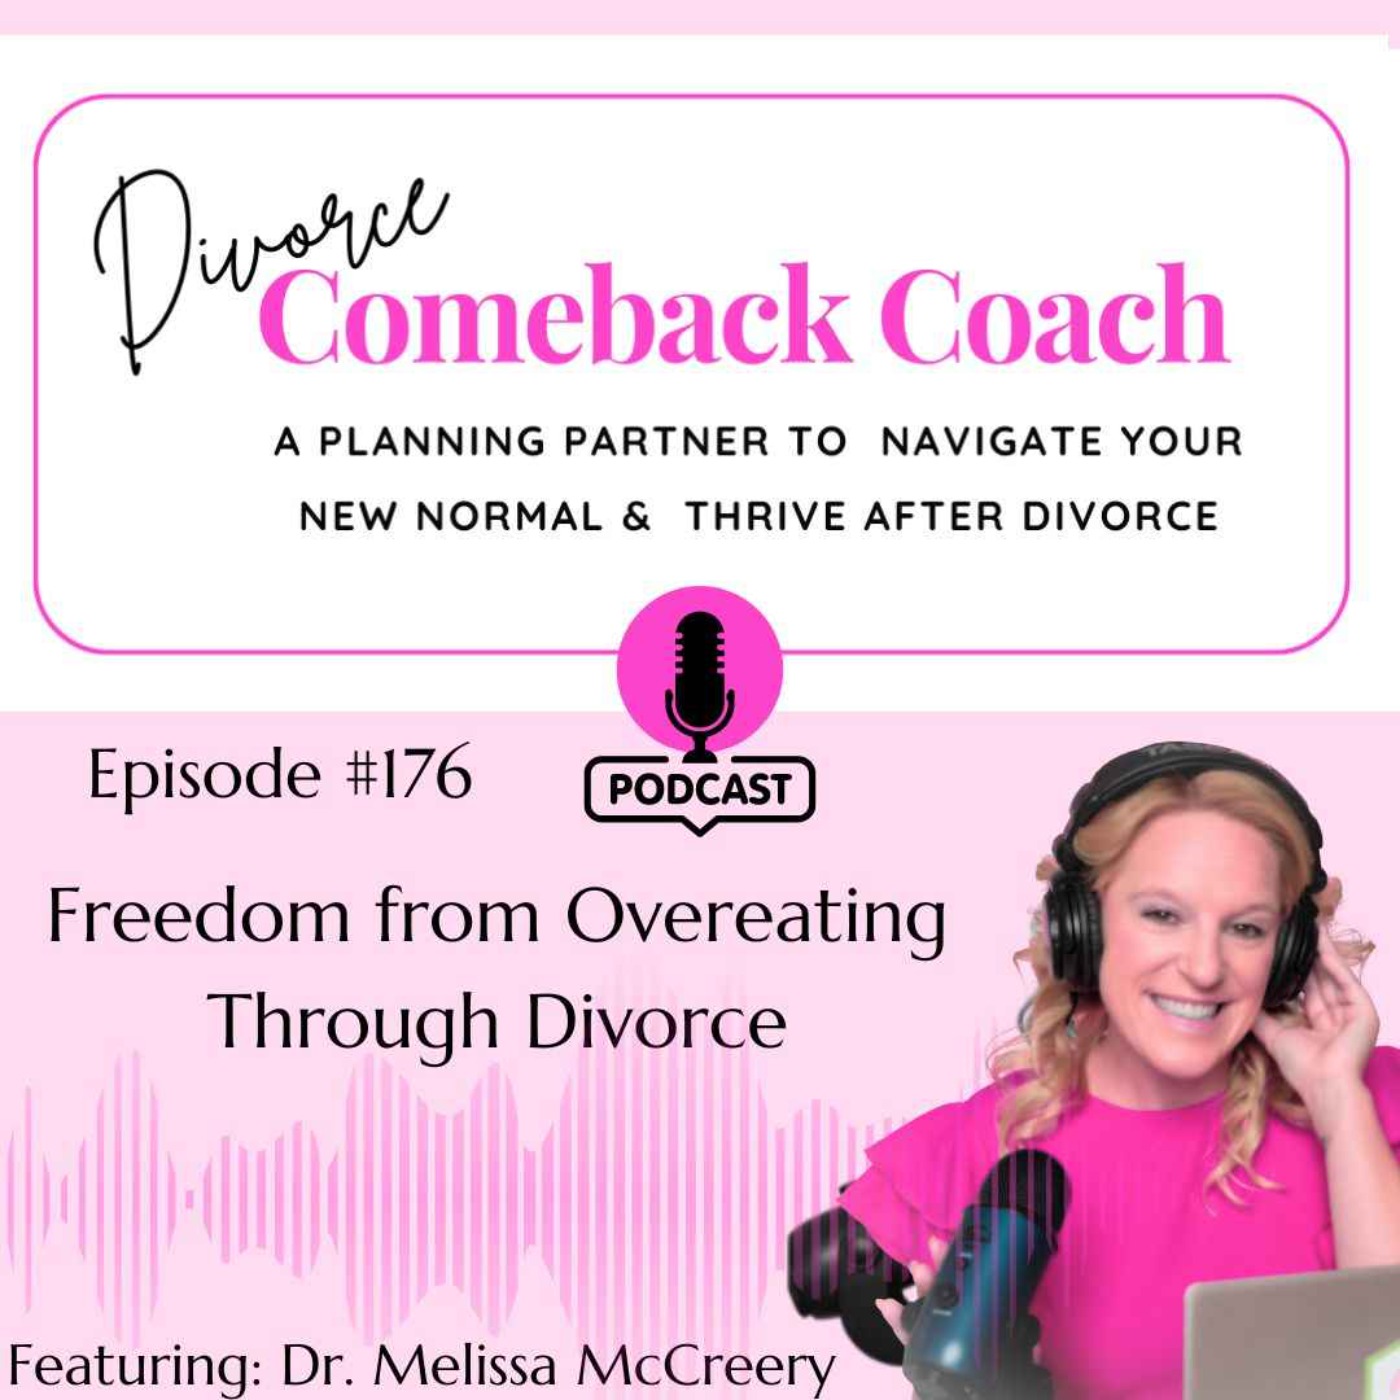 Freedom from Overeating Through Divorce